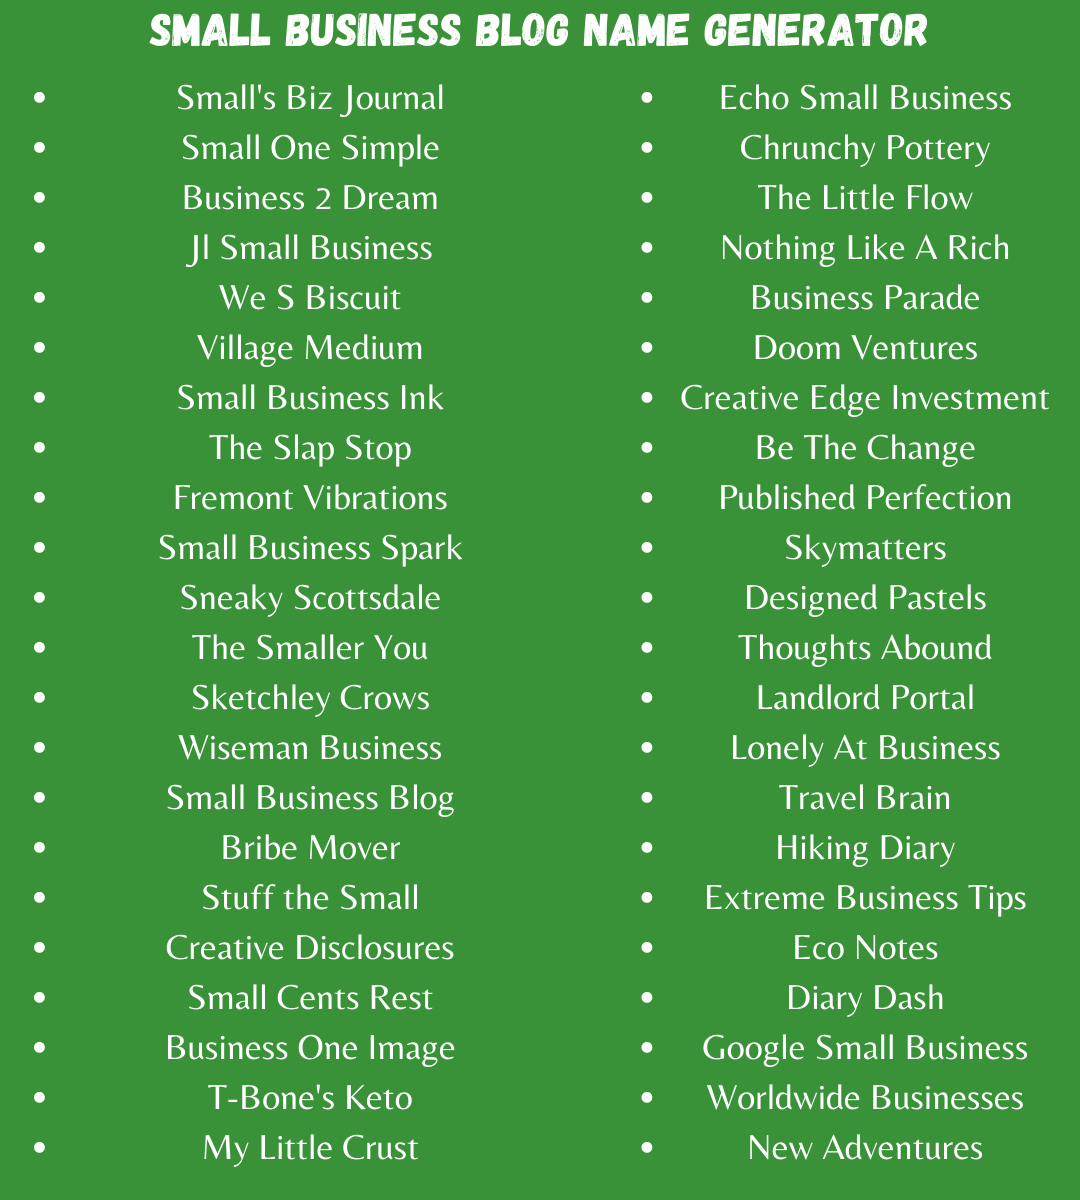 Small Business Blog Names